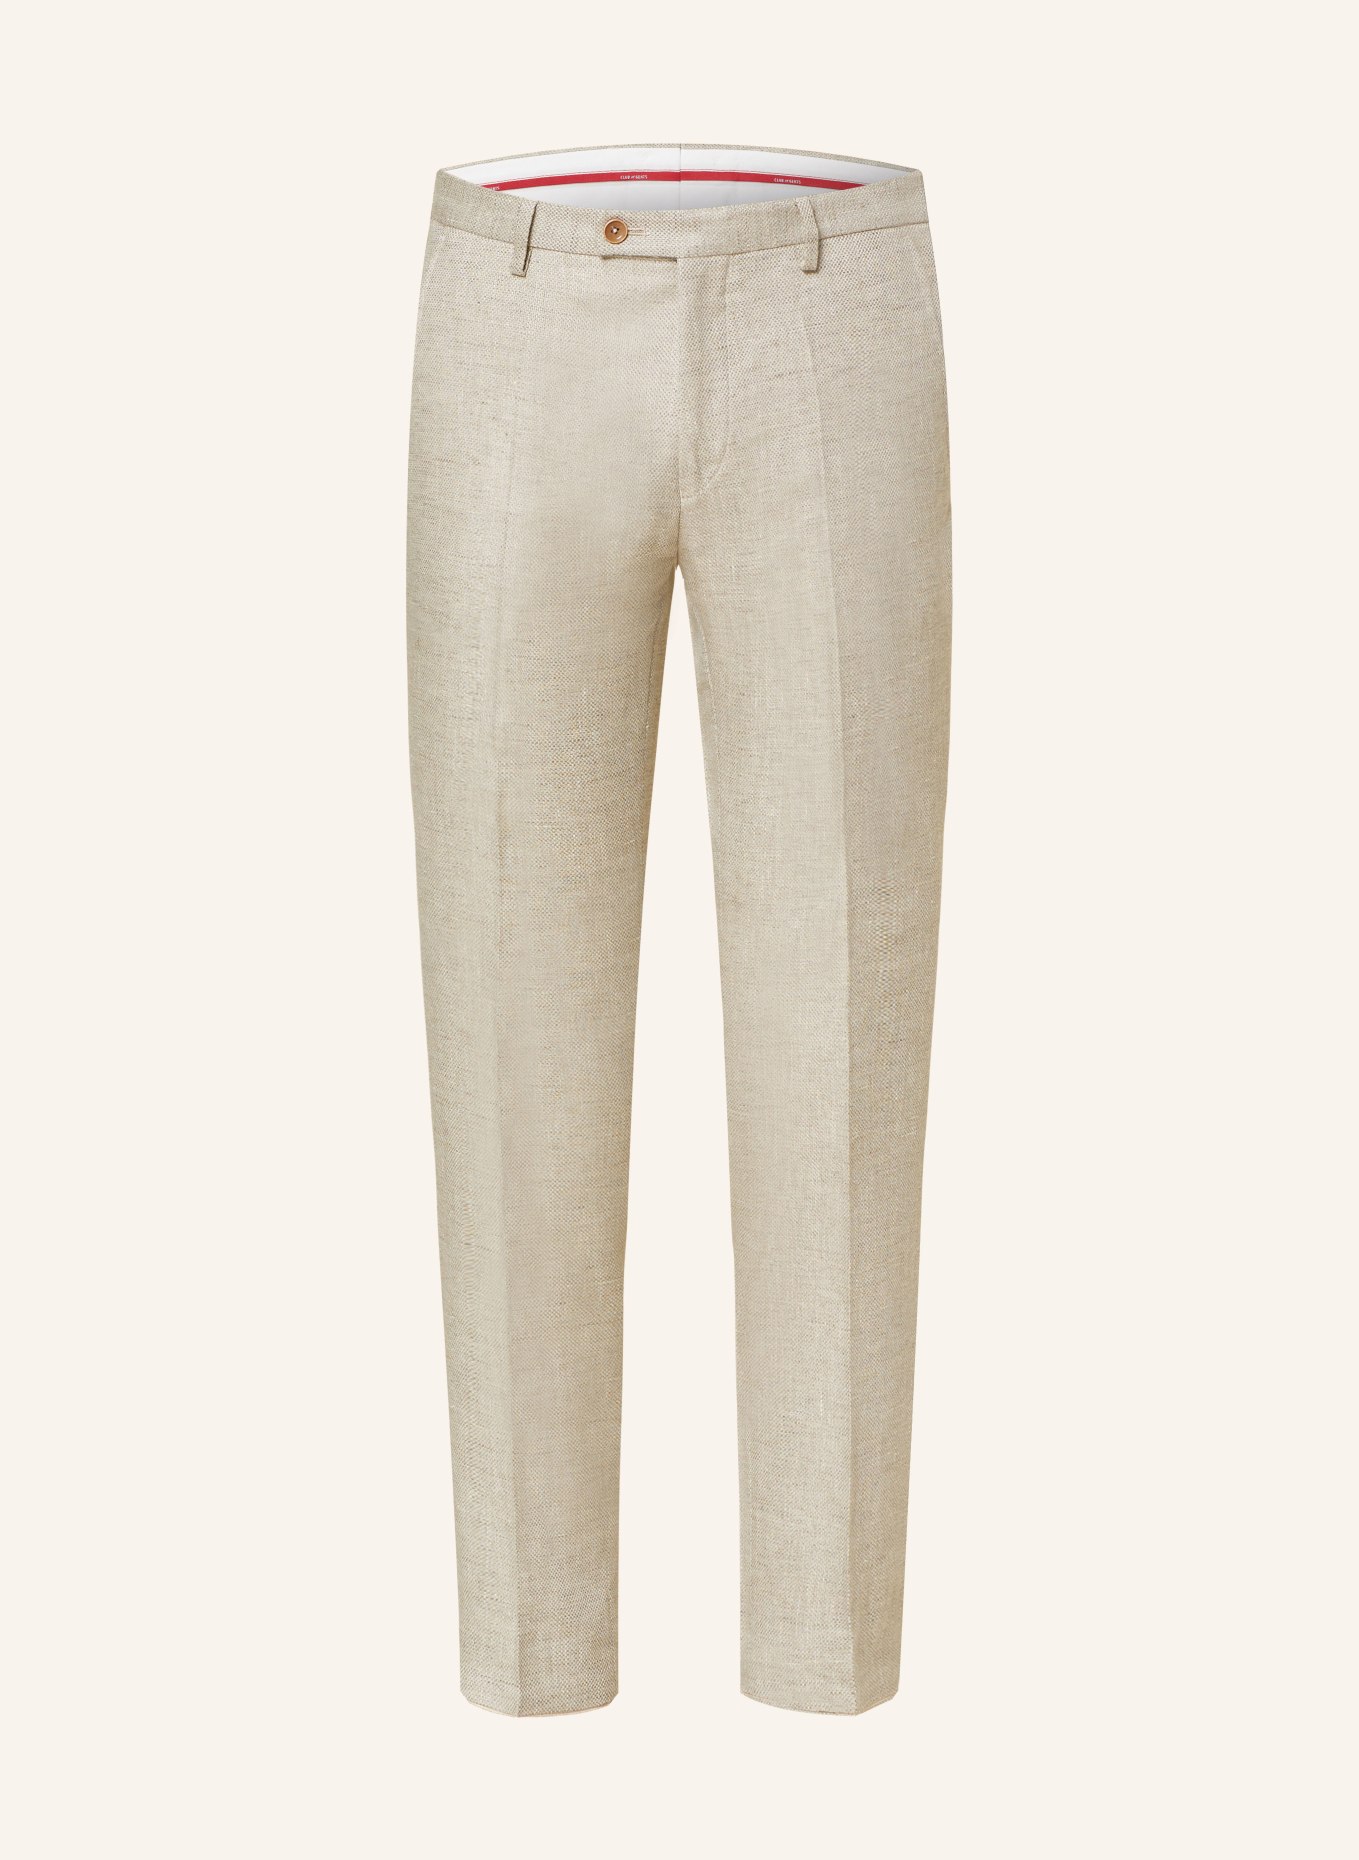 CG - CLUB of GENTS Suit trousers CG PACO slim fit with linen, Color: 21 beige hell (Image 1)